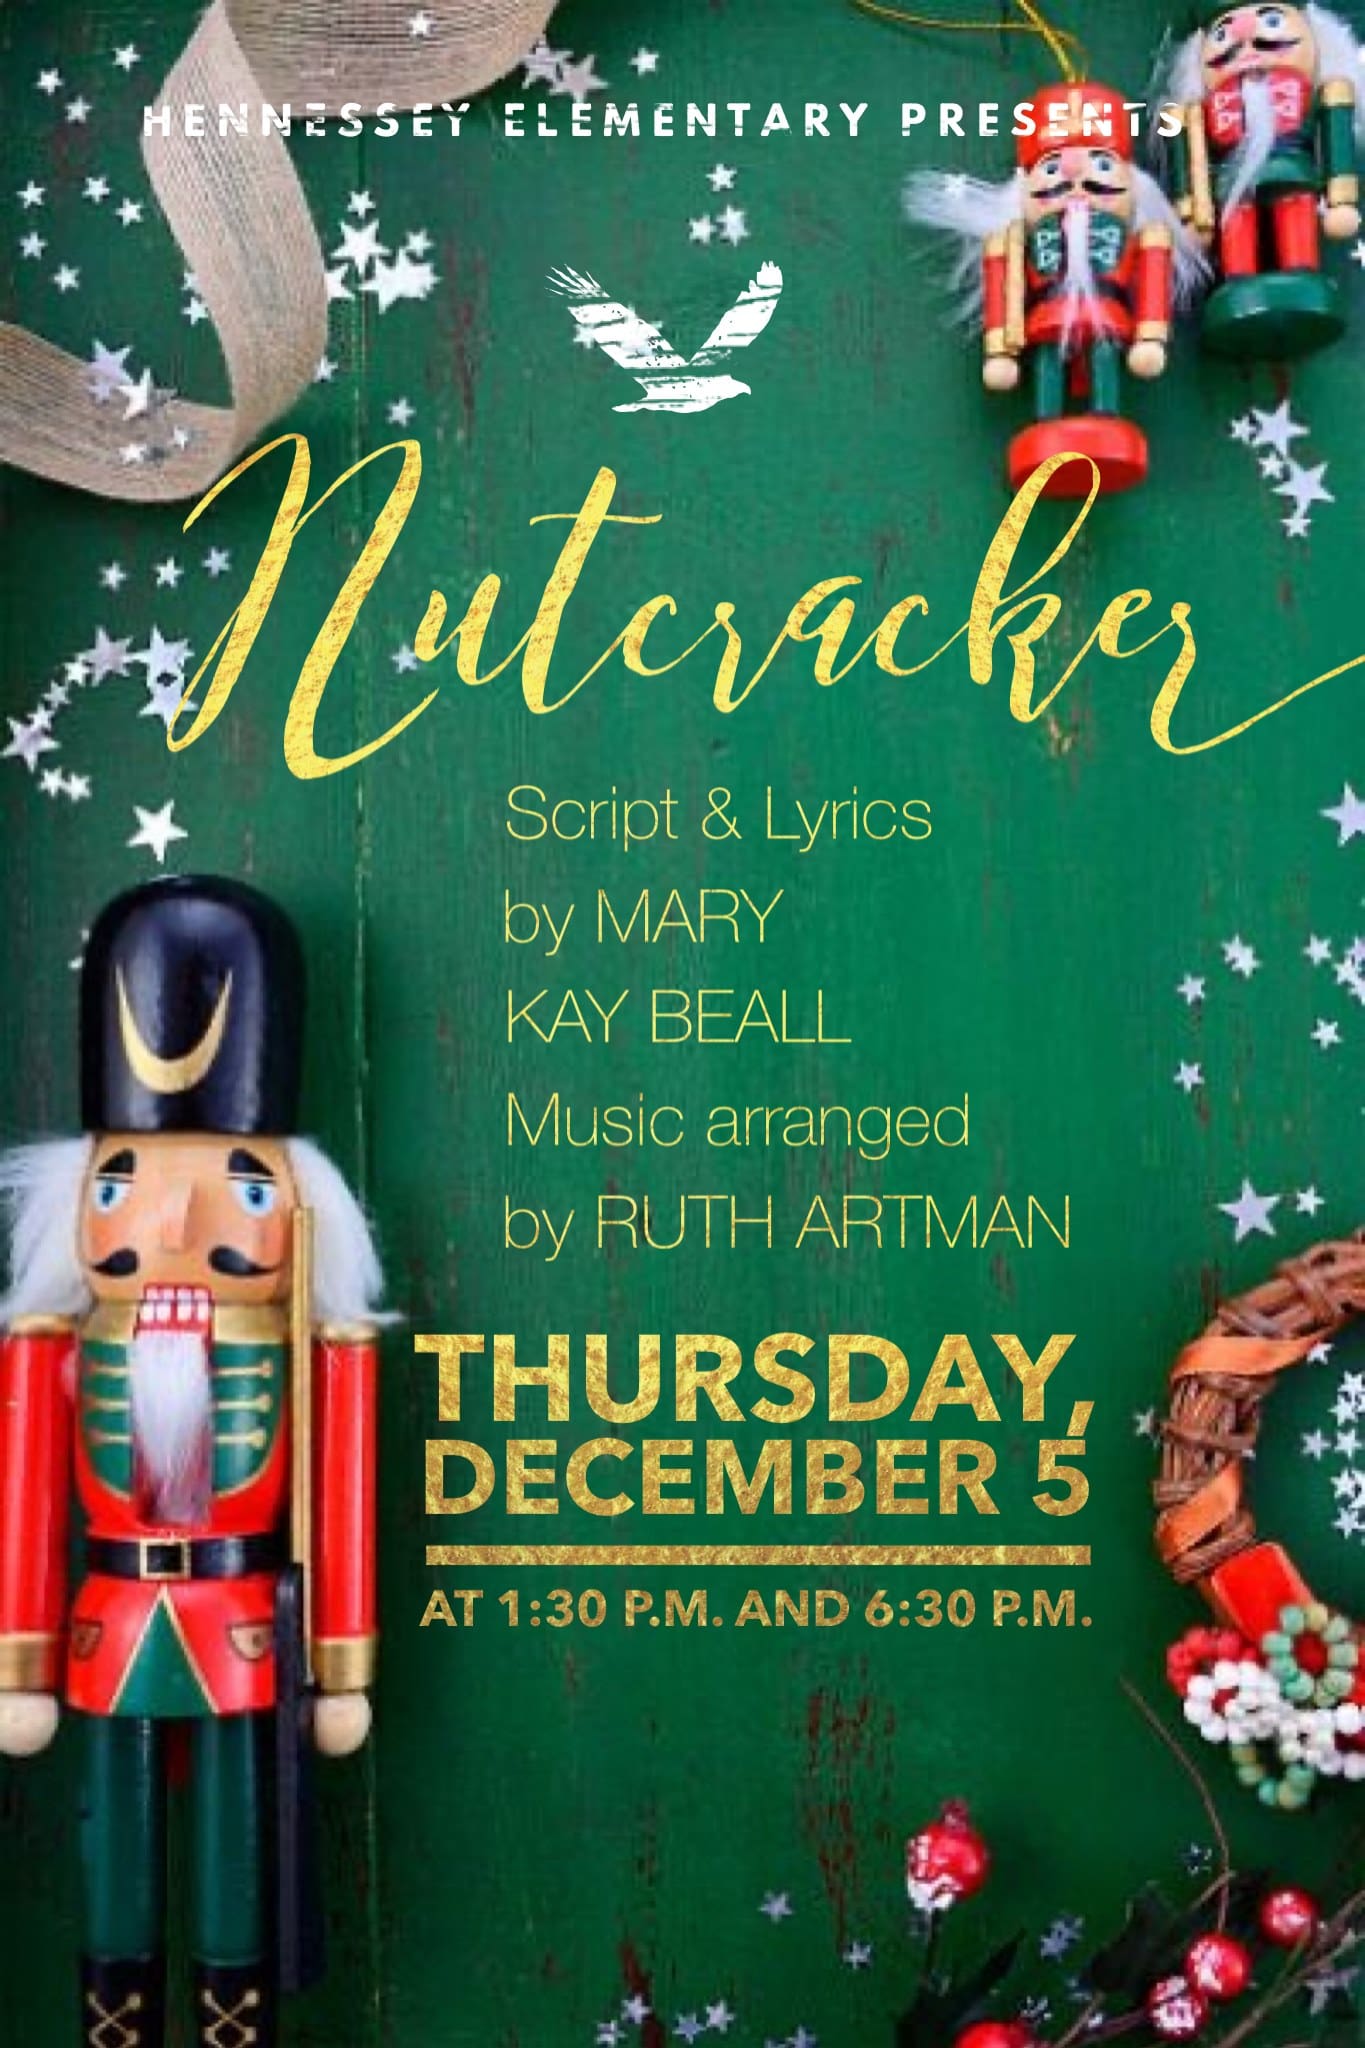 HENNESSEY ELEMENTARY PRESENTS THE NUTCRACKER THURSDAY, DECEMBER 5TH AT 1:30PM & 6:30PM